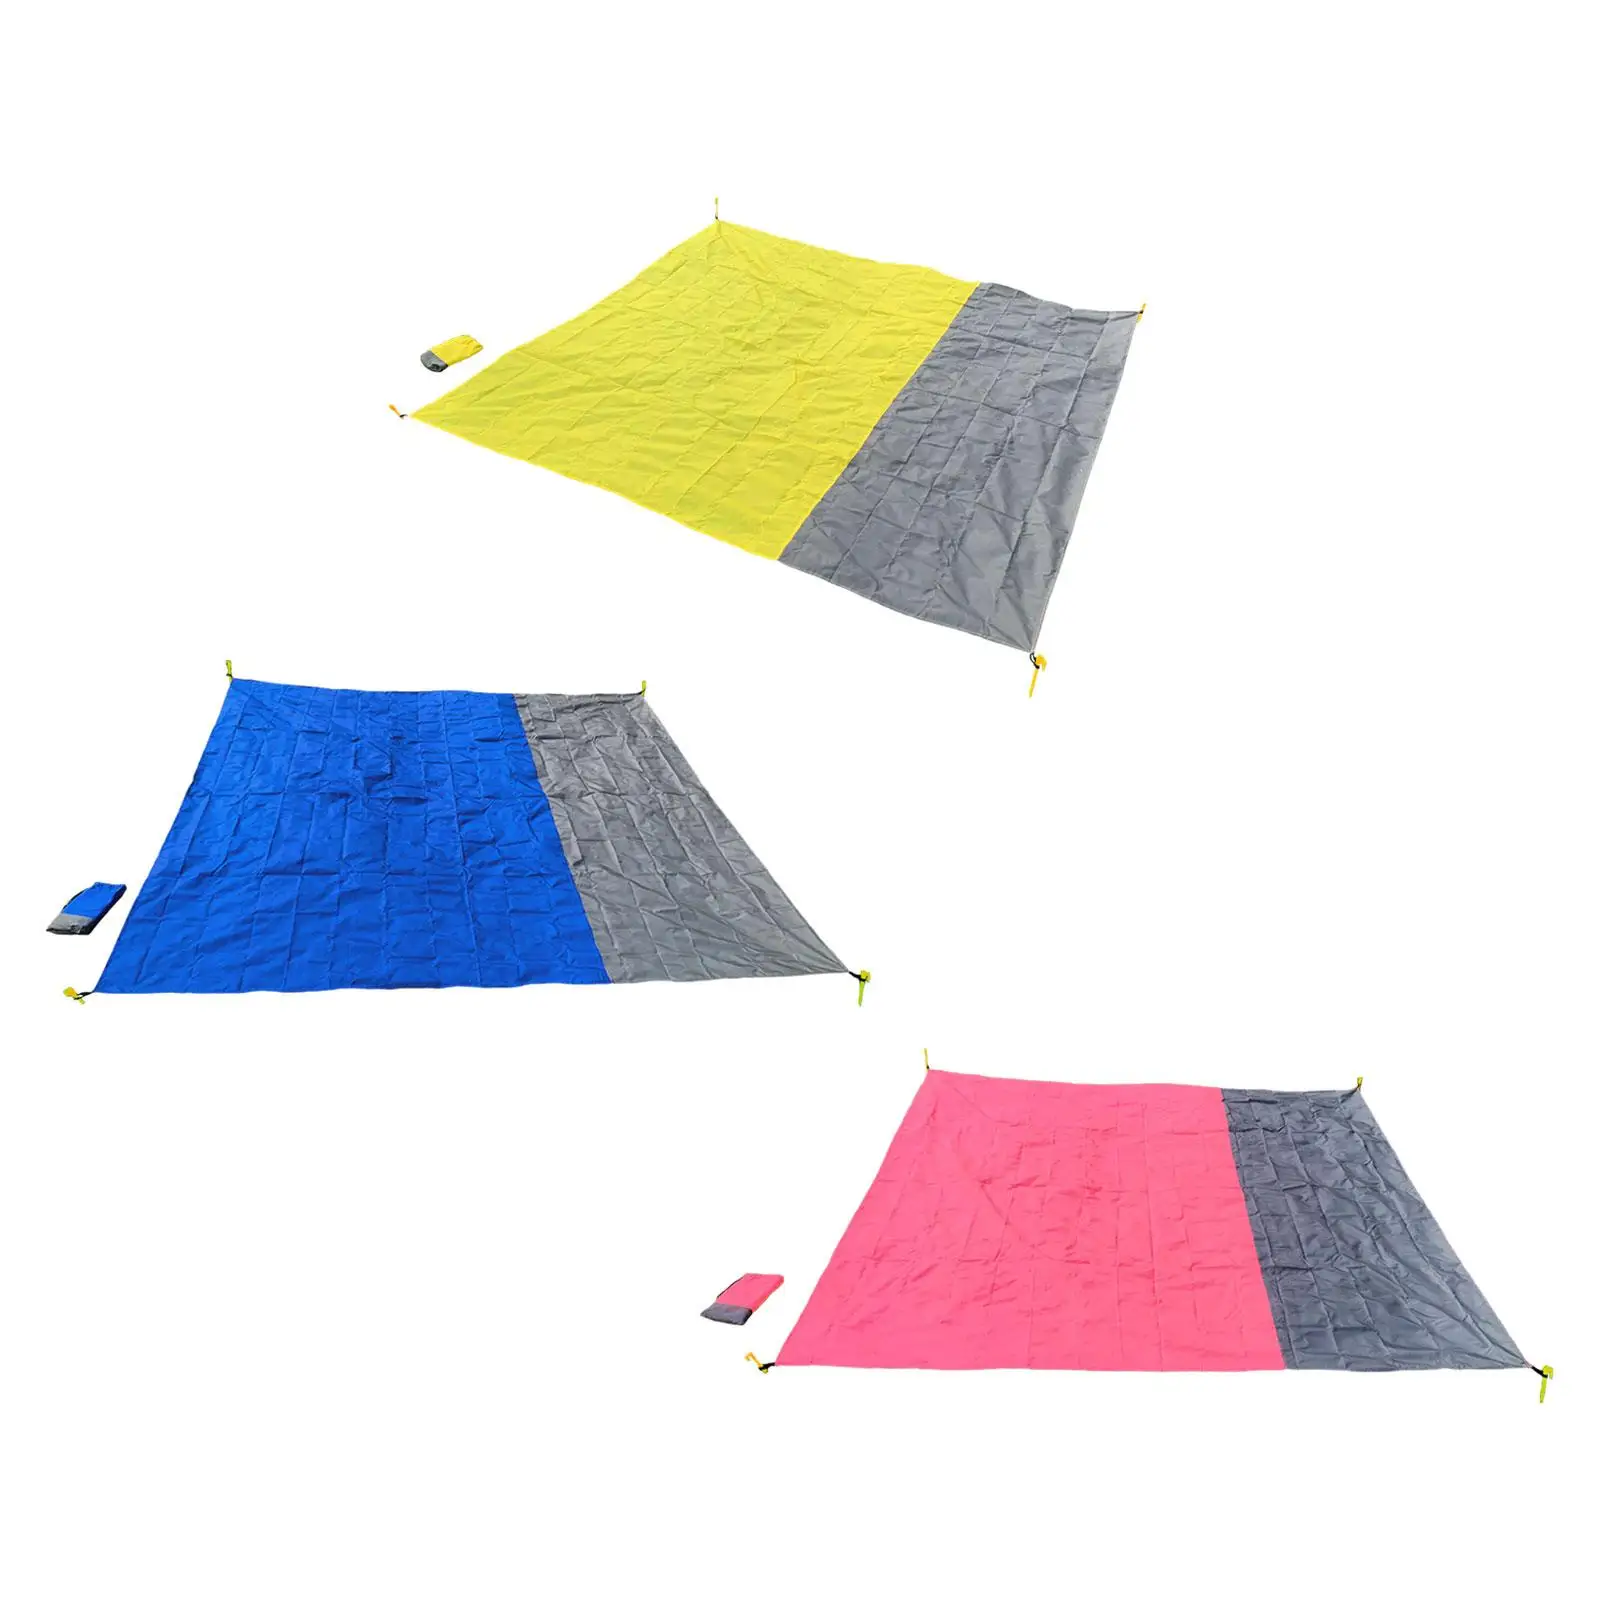 Picnic Blanket Durable Folding Camping Blanket Beach Mat Accessories for Park Backpacking Music Festival Hiking Sporting Events